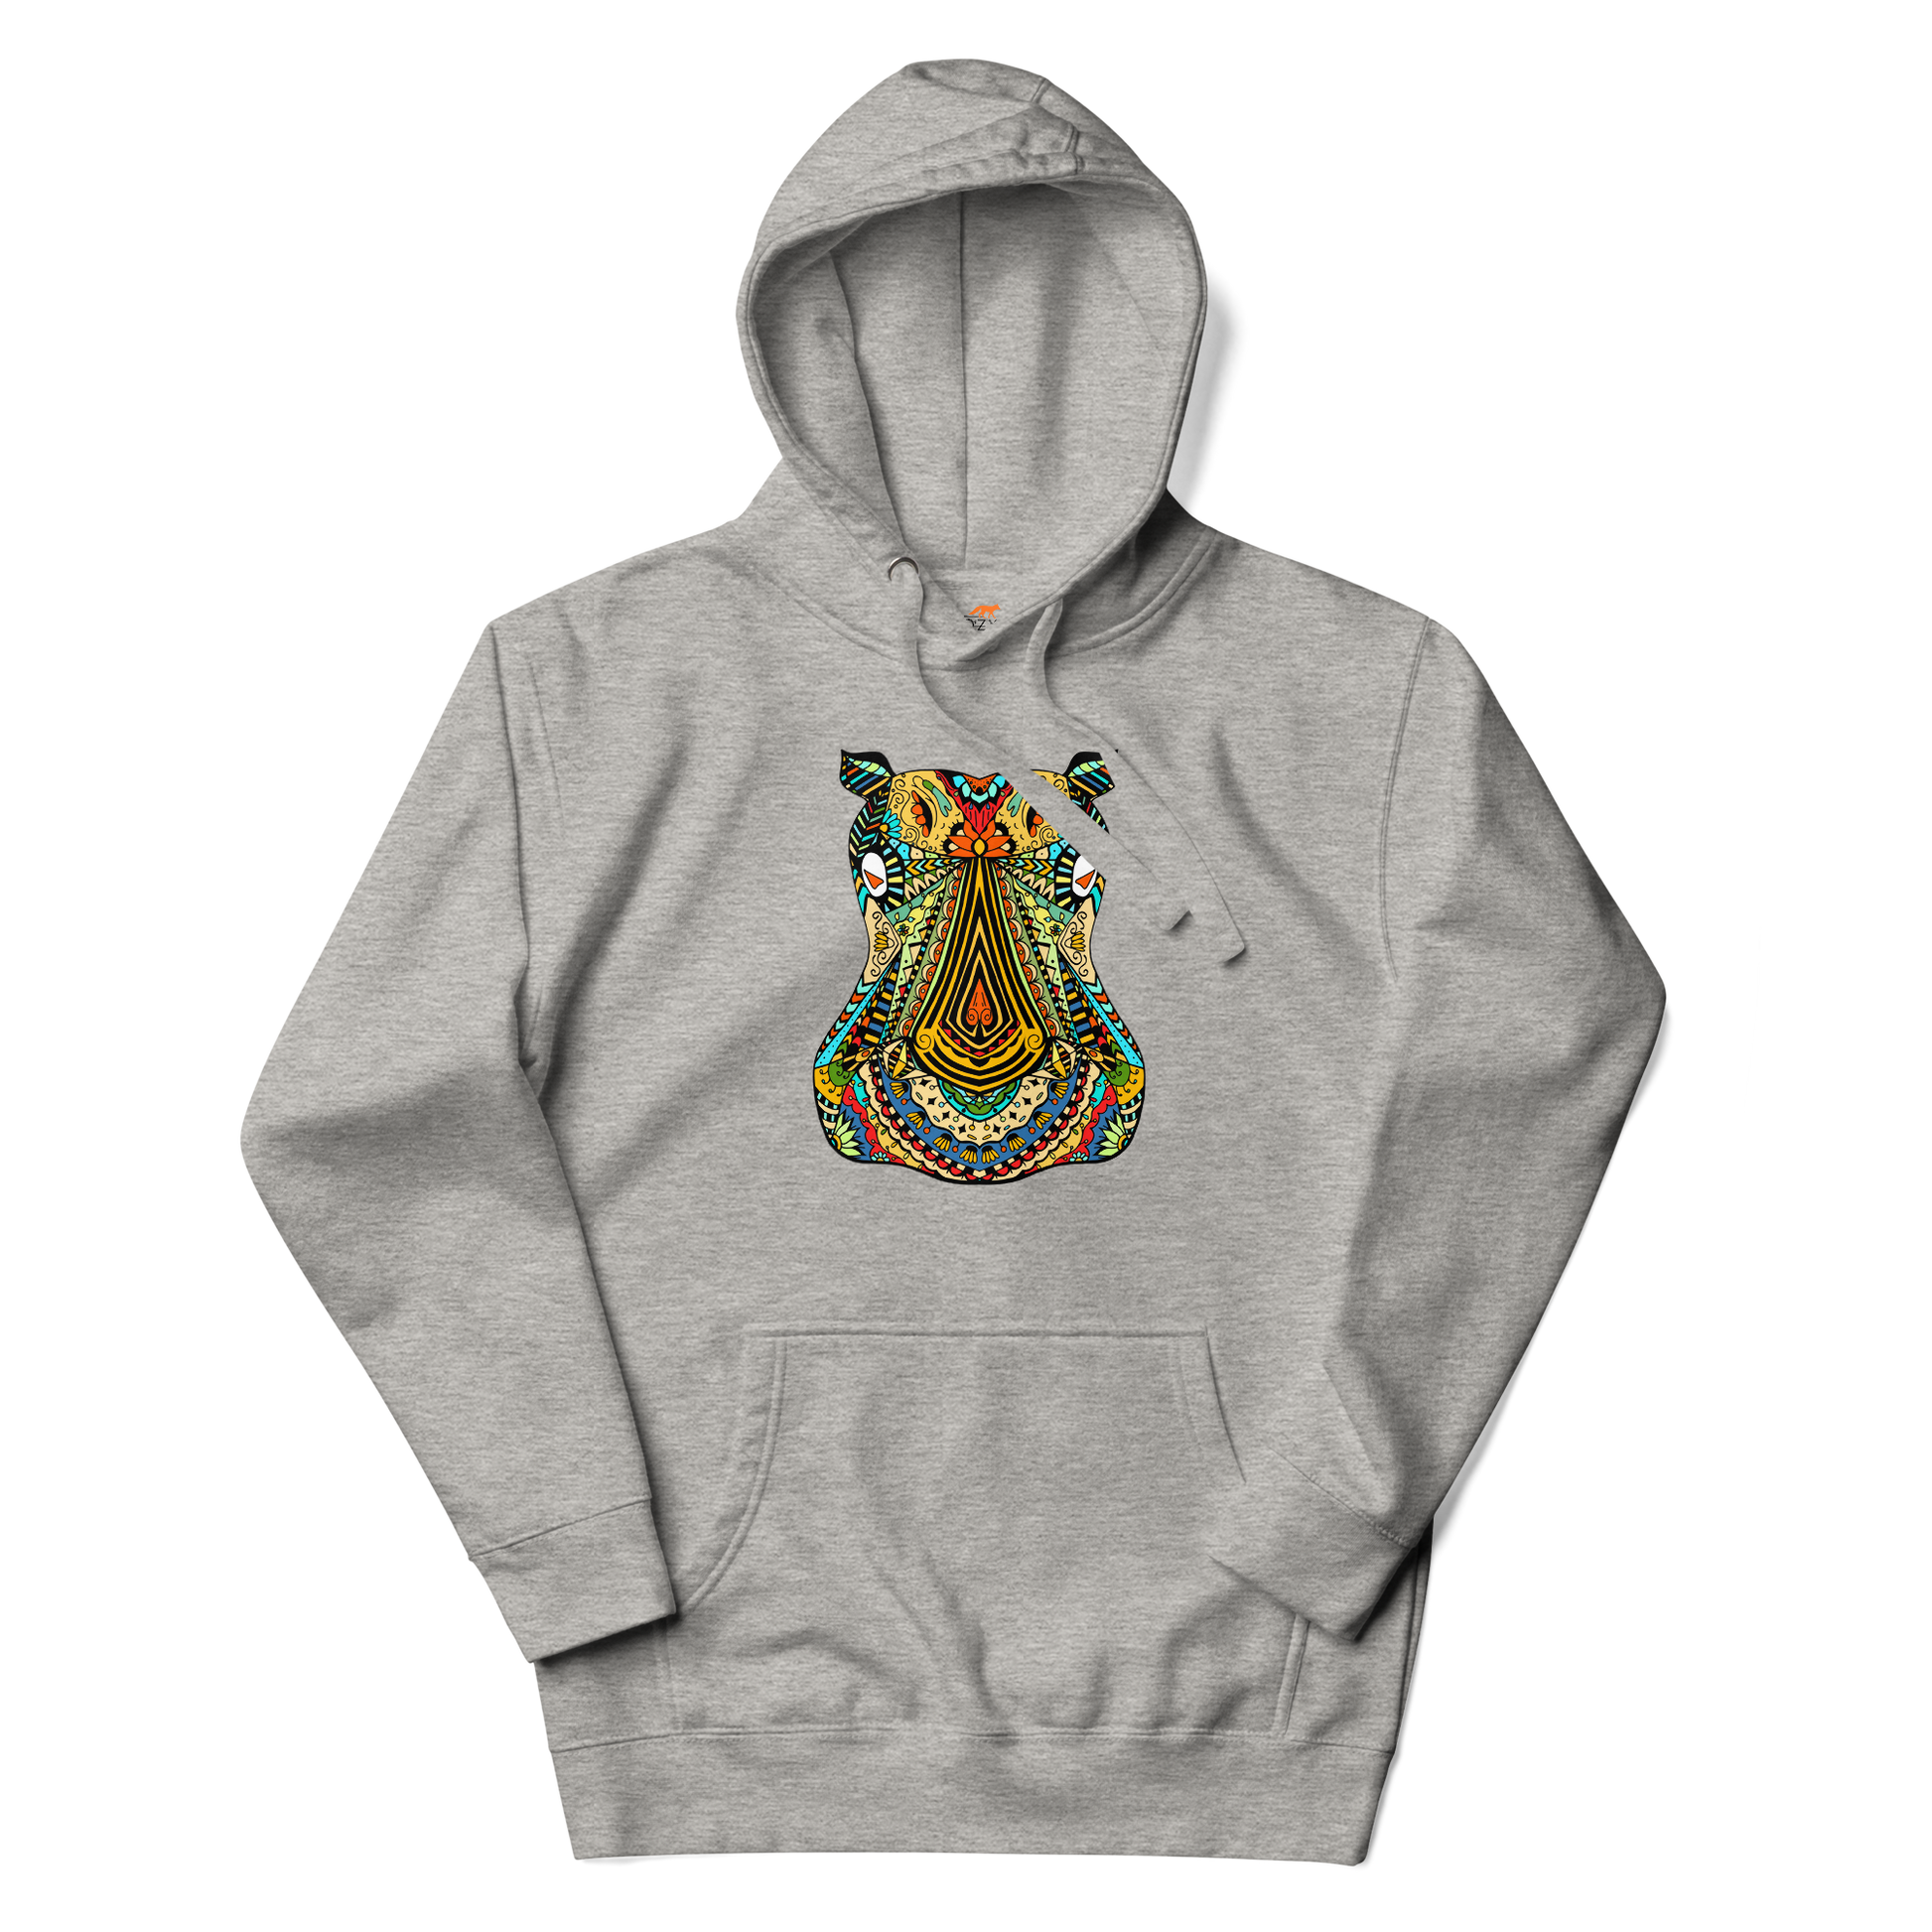 Carbon Grey Premium Hippo Hoodie featuring a vibrant Zentangle Hippo graphic on the chest - Cool Graphic Hippo Hoodies - Boozy Fox